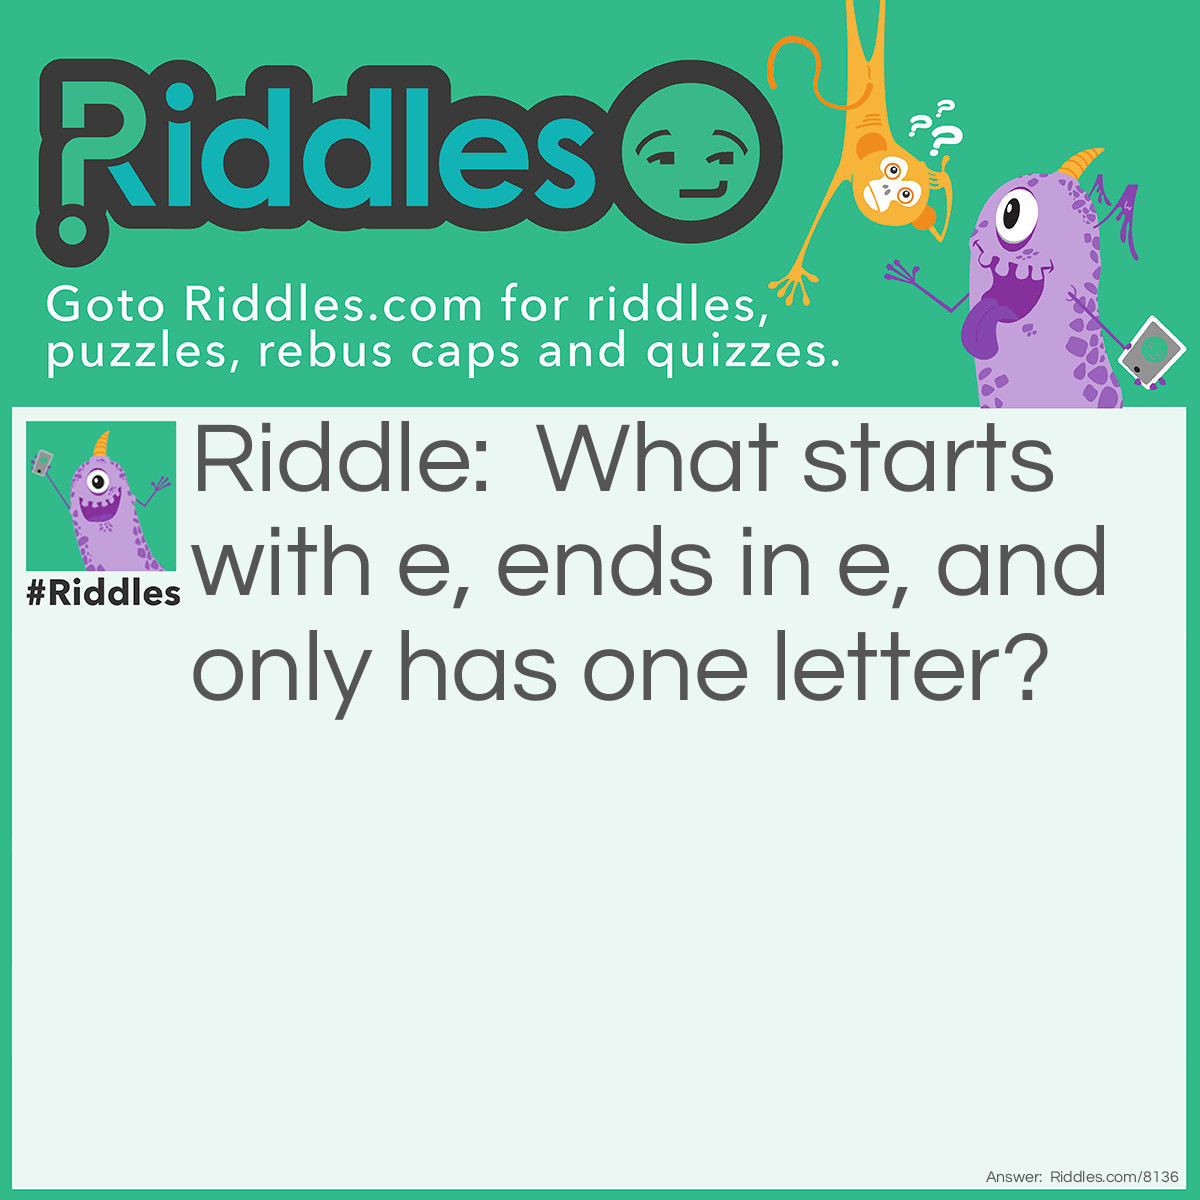 Riddle: What starts with e, ends in e, and only has one letter? Answer: An envelope!